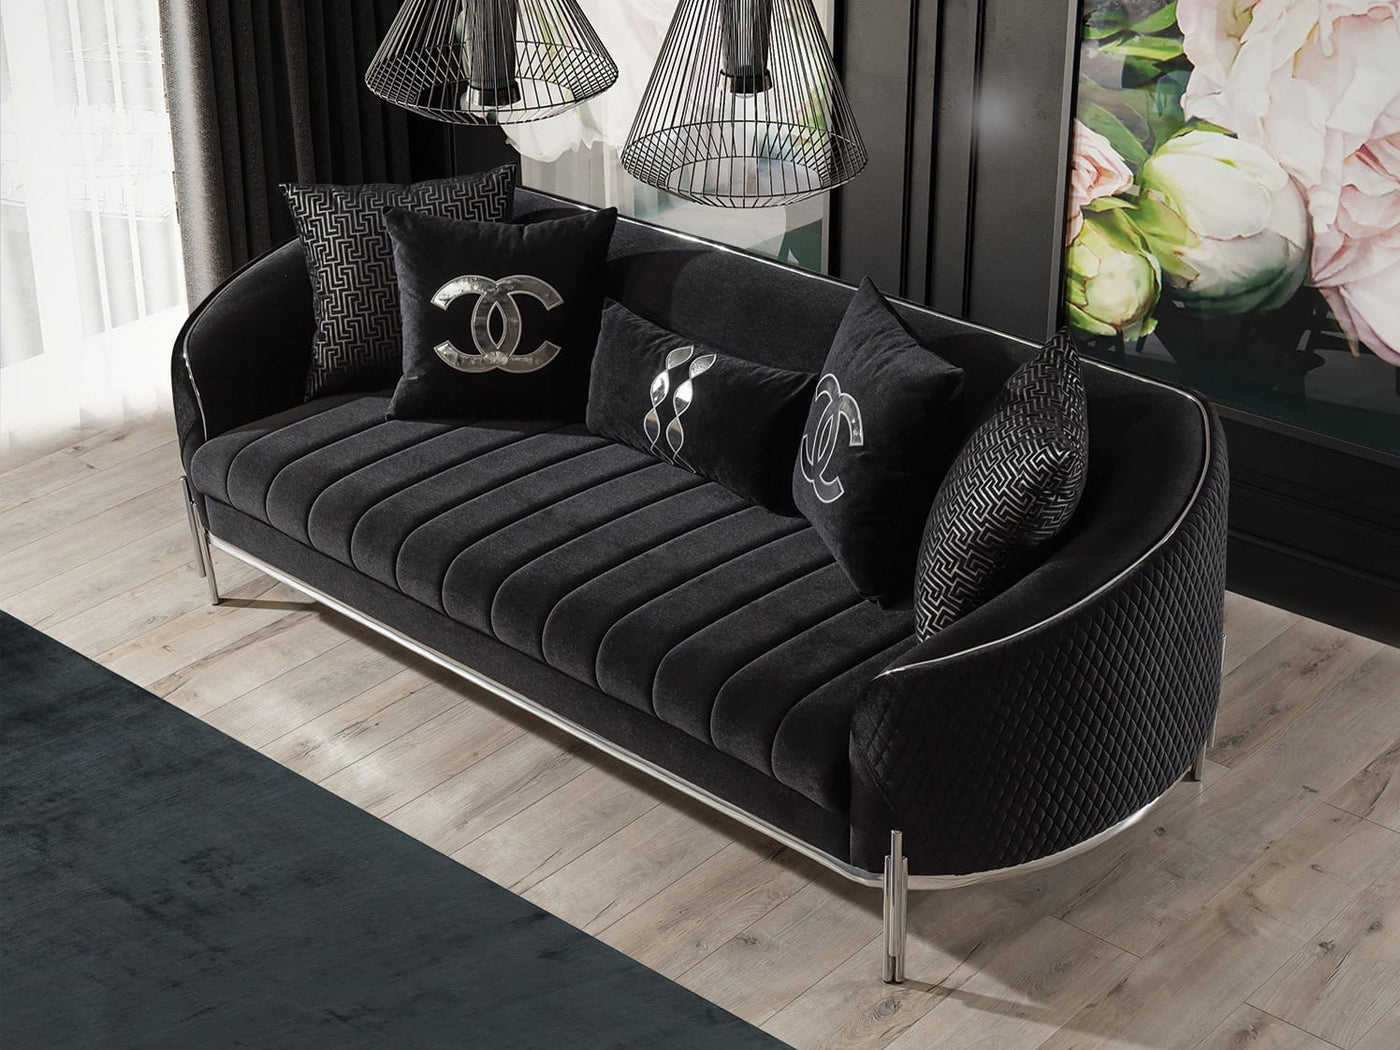 Channel Living Room Set – Istanbul Furniture - Home of Unique